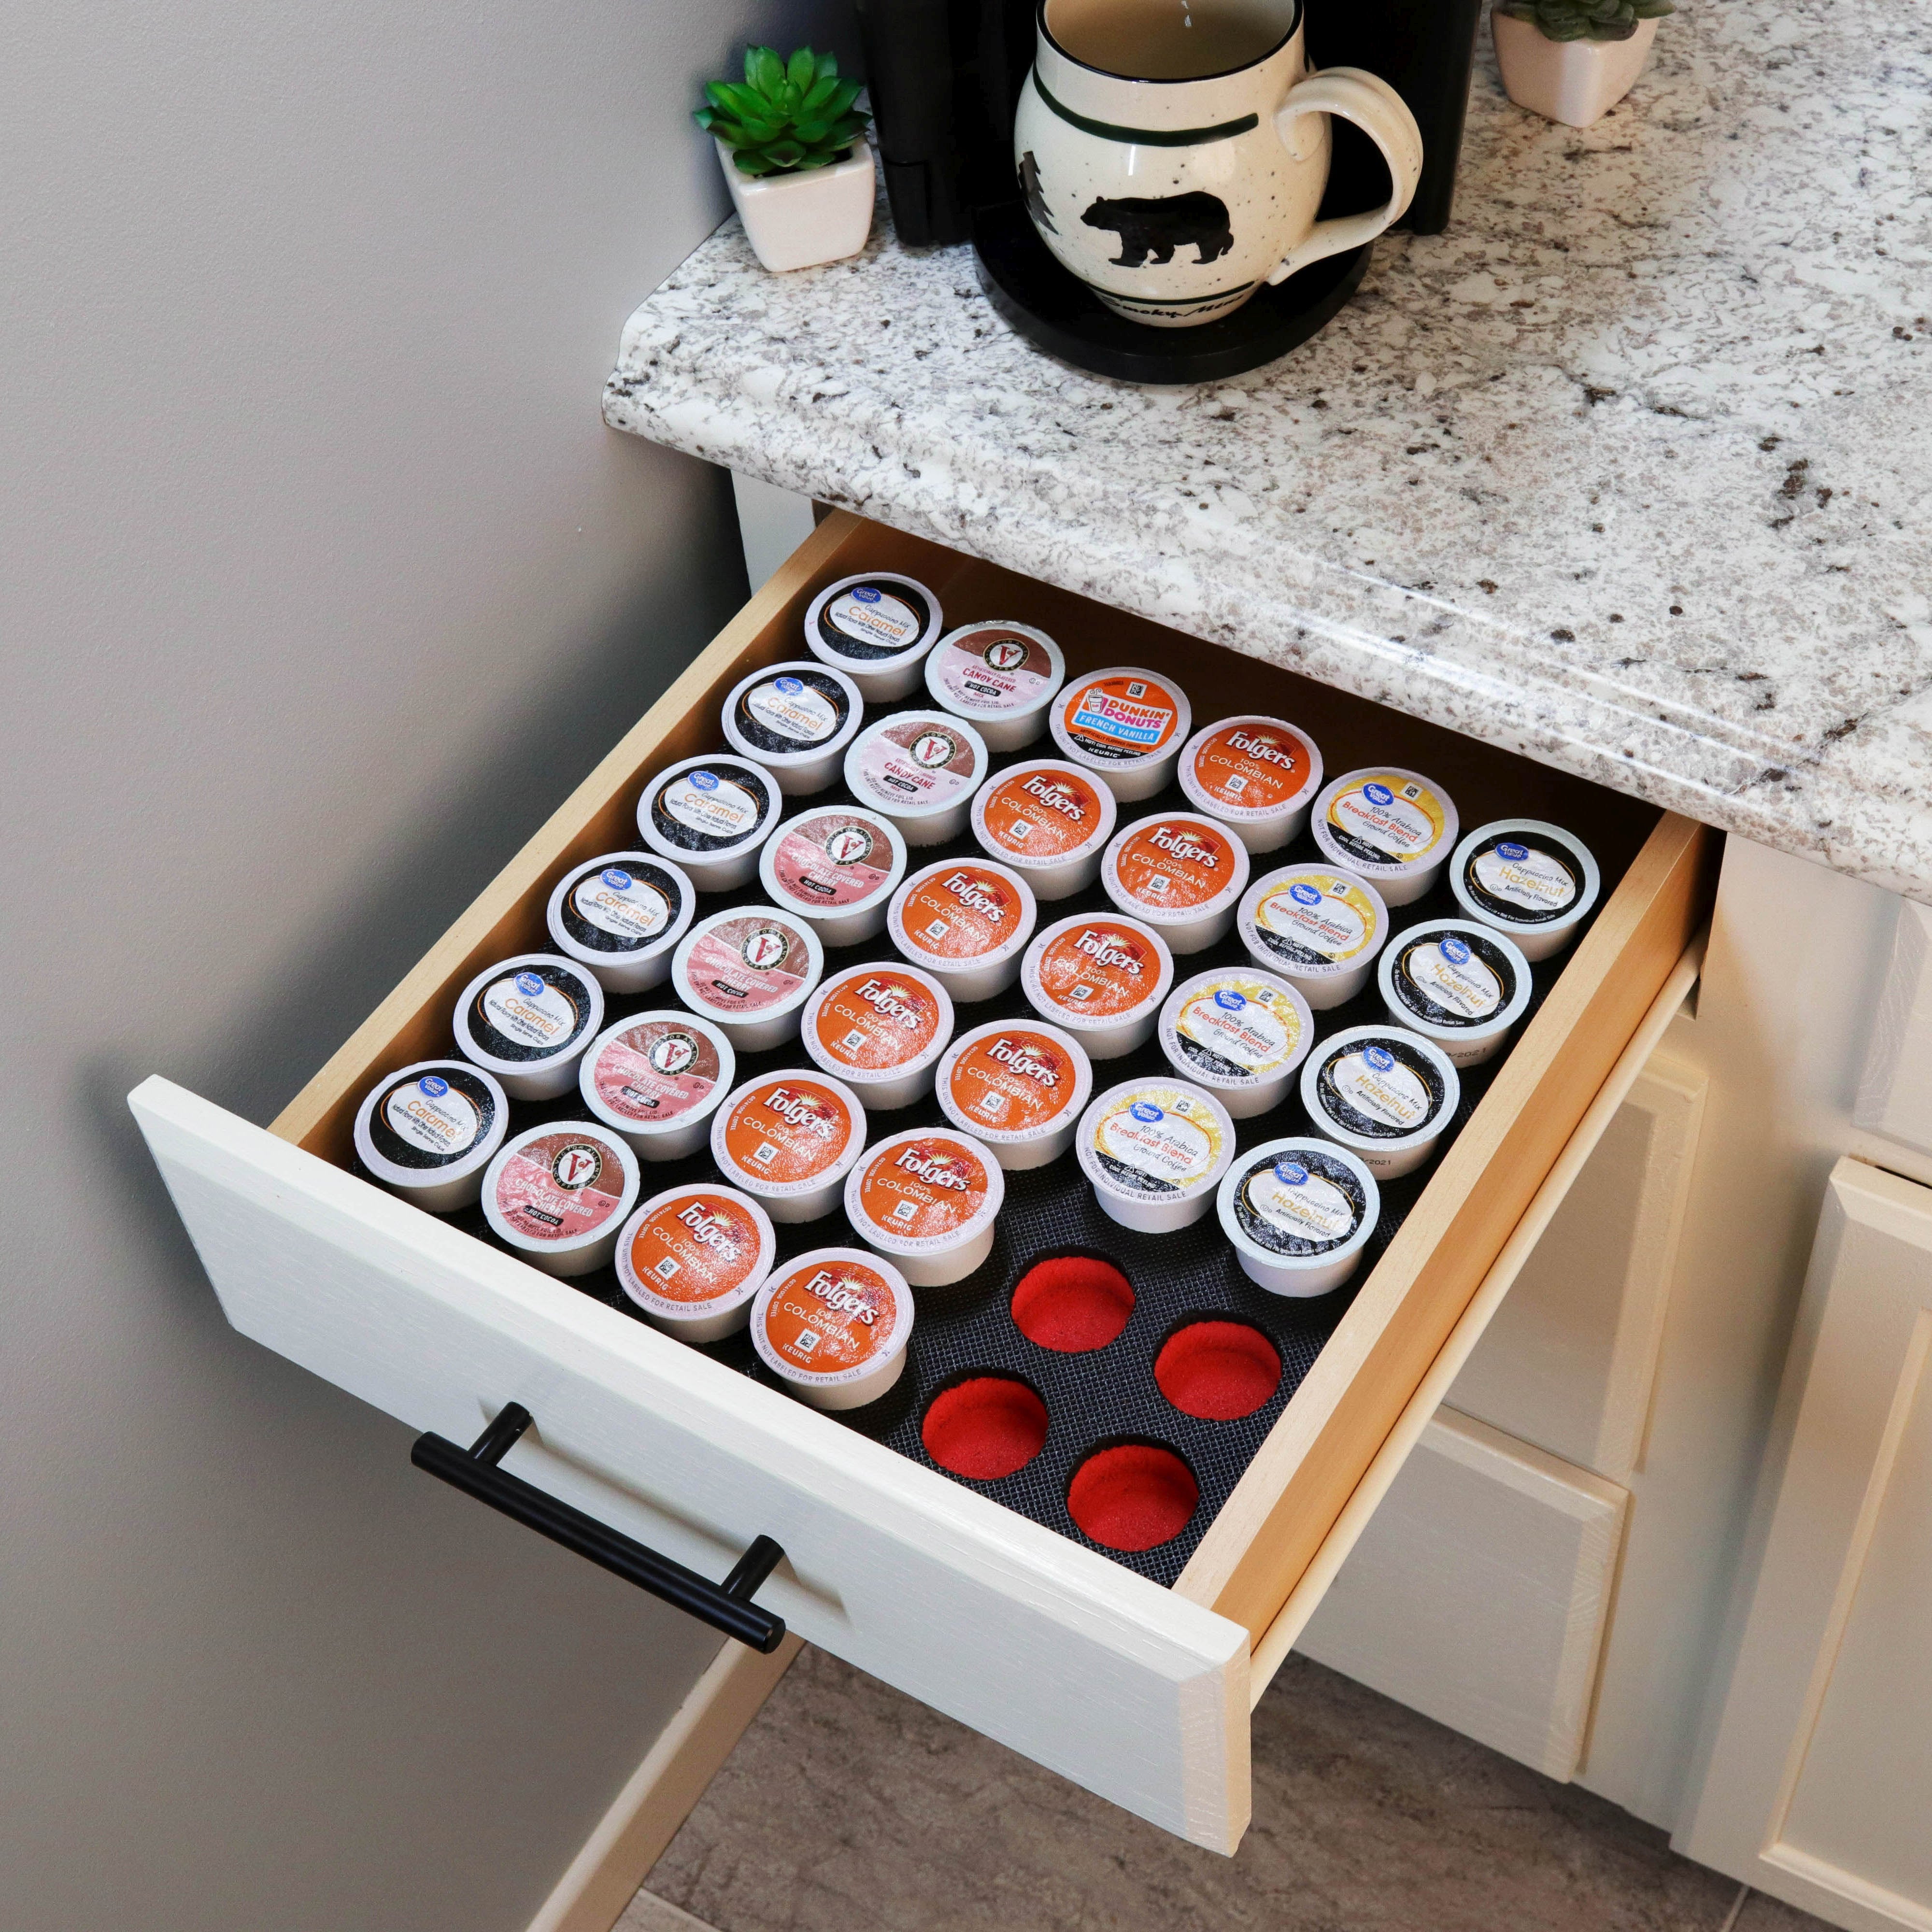 Coffee Red and Black Pod Storage Deluxe Organizer Tray Drawer Insert Washable 12.5 X 12.5 Inches Holds 36 Compatible with Keurig K-Cup